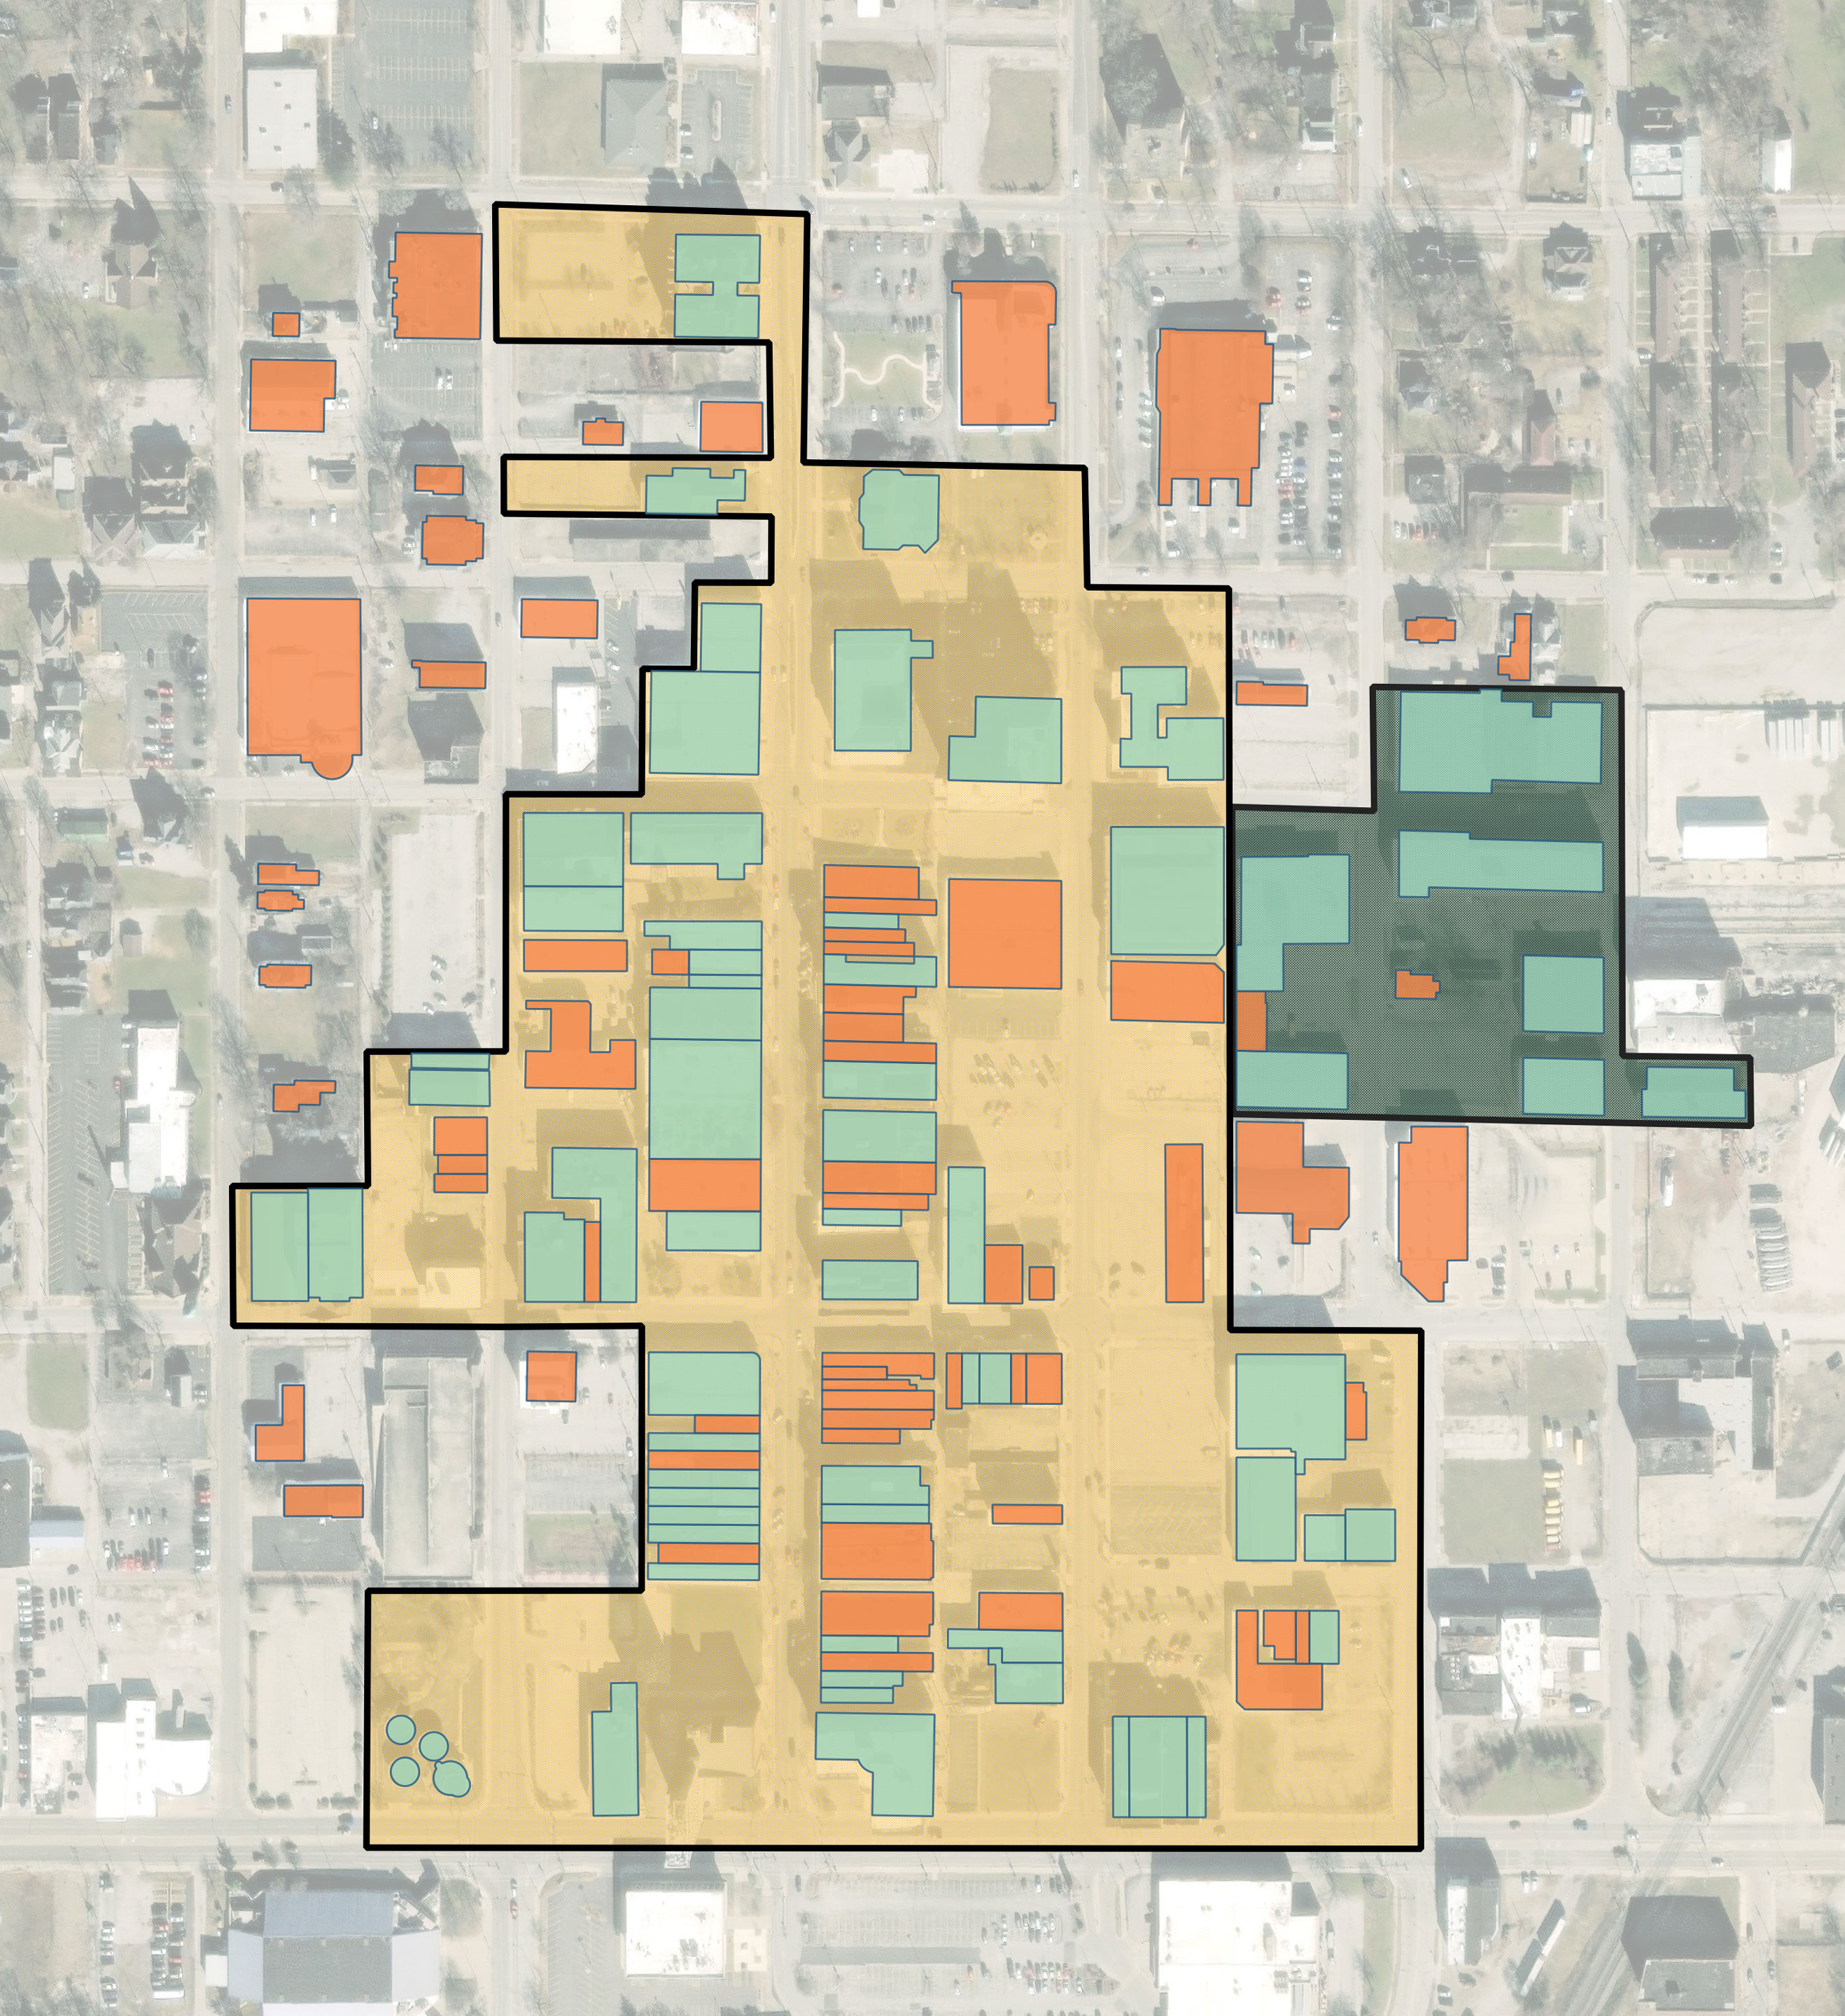 Map of Downtown Danville, Illinois with multiple colors indicating walk times from the center of downtown to its boundaries.